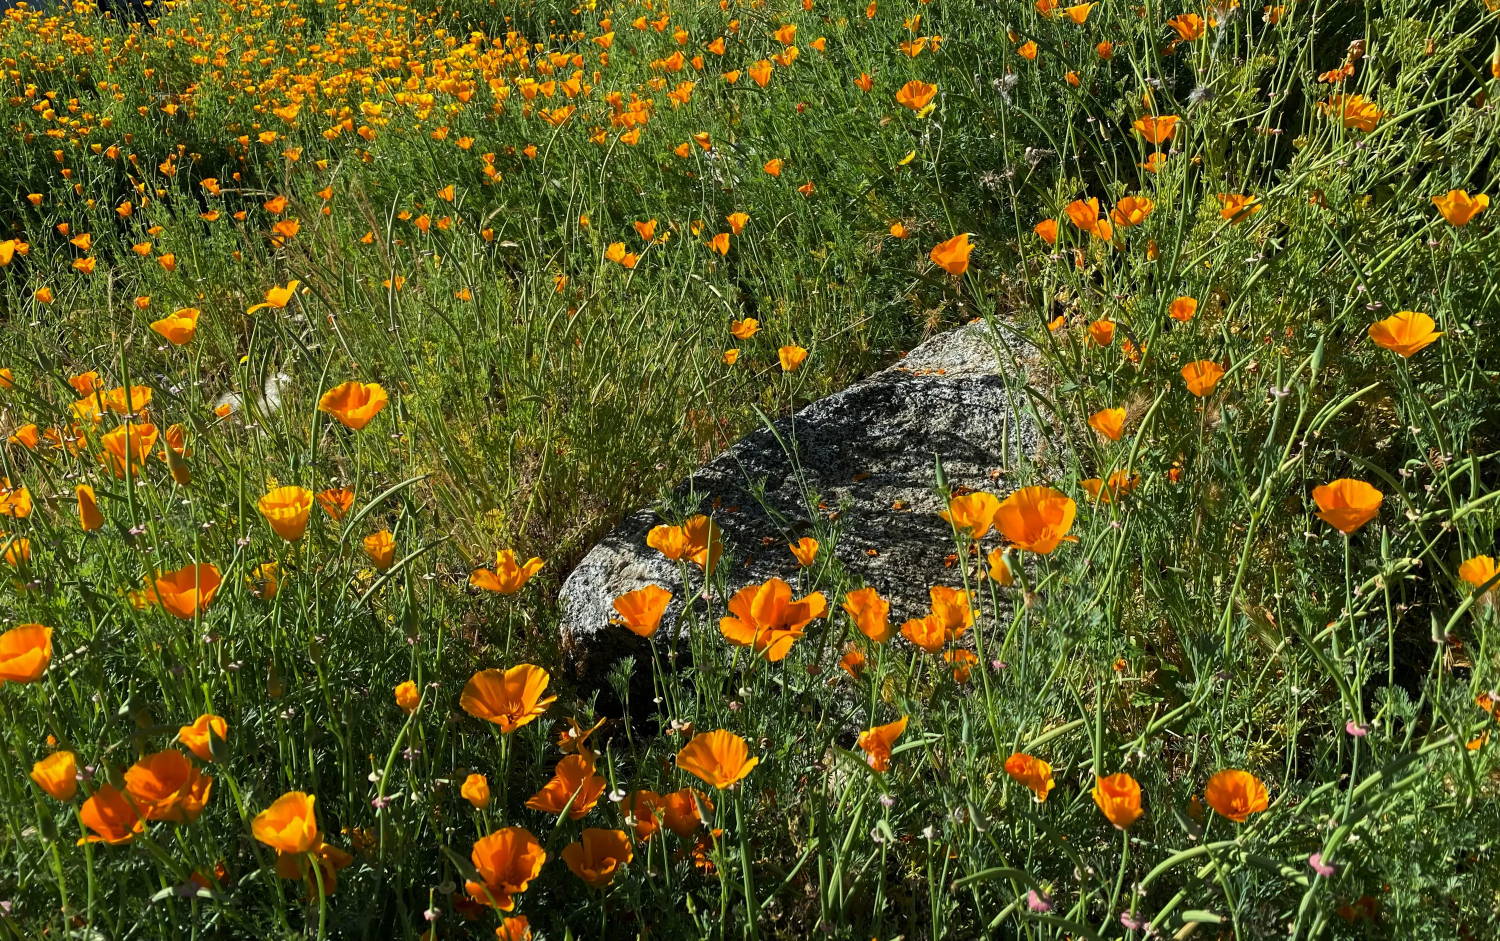 A field of wild poppies